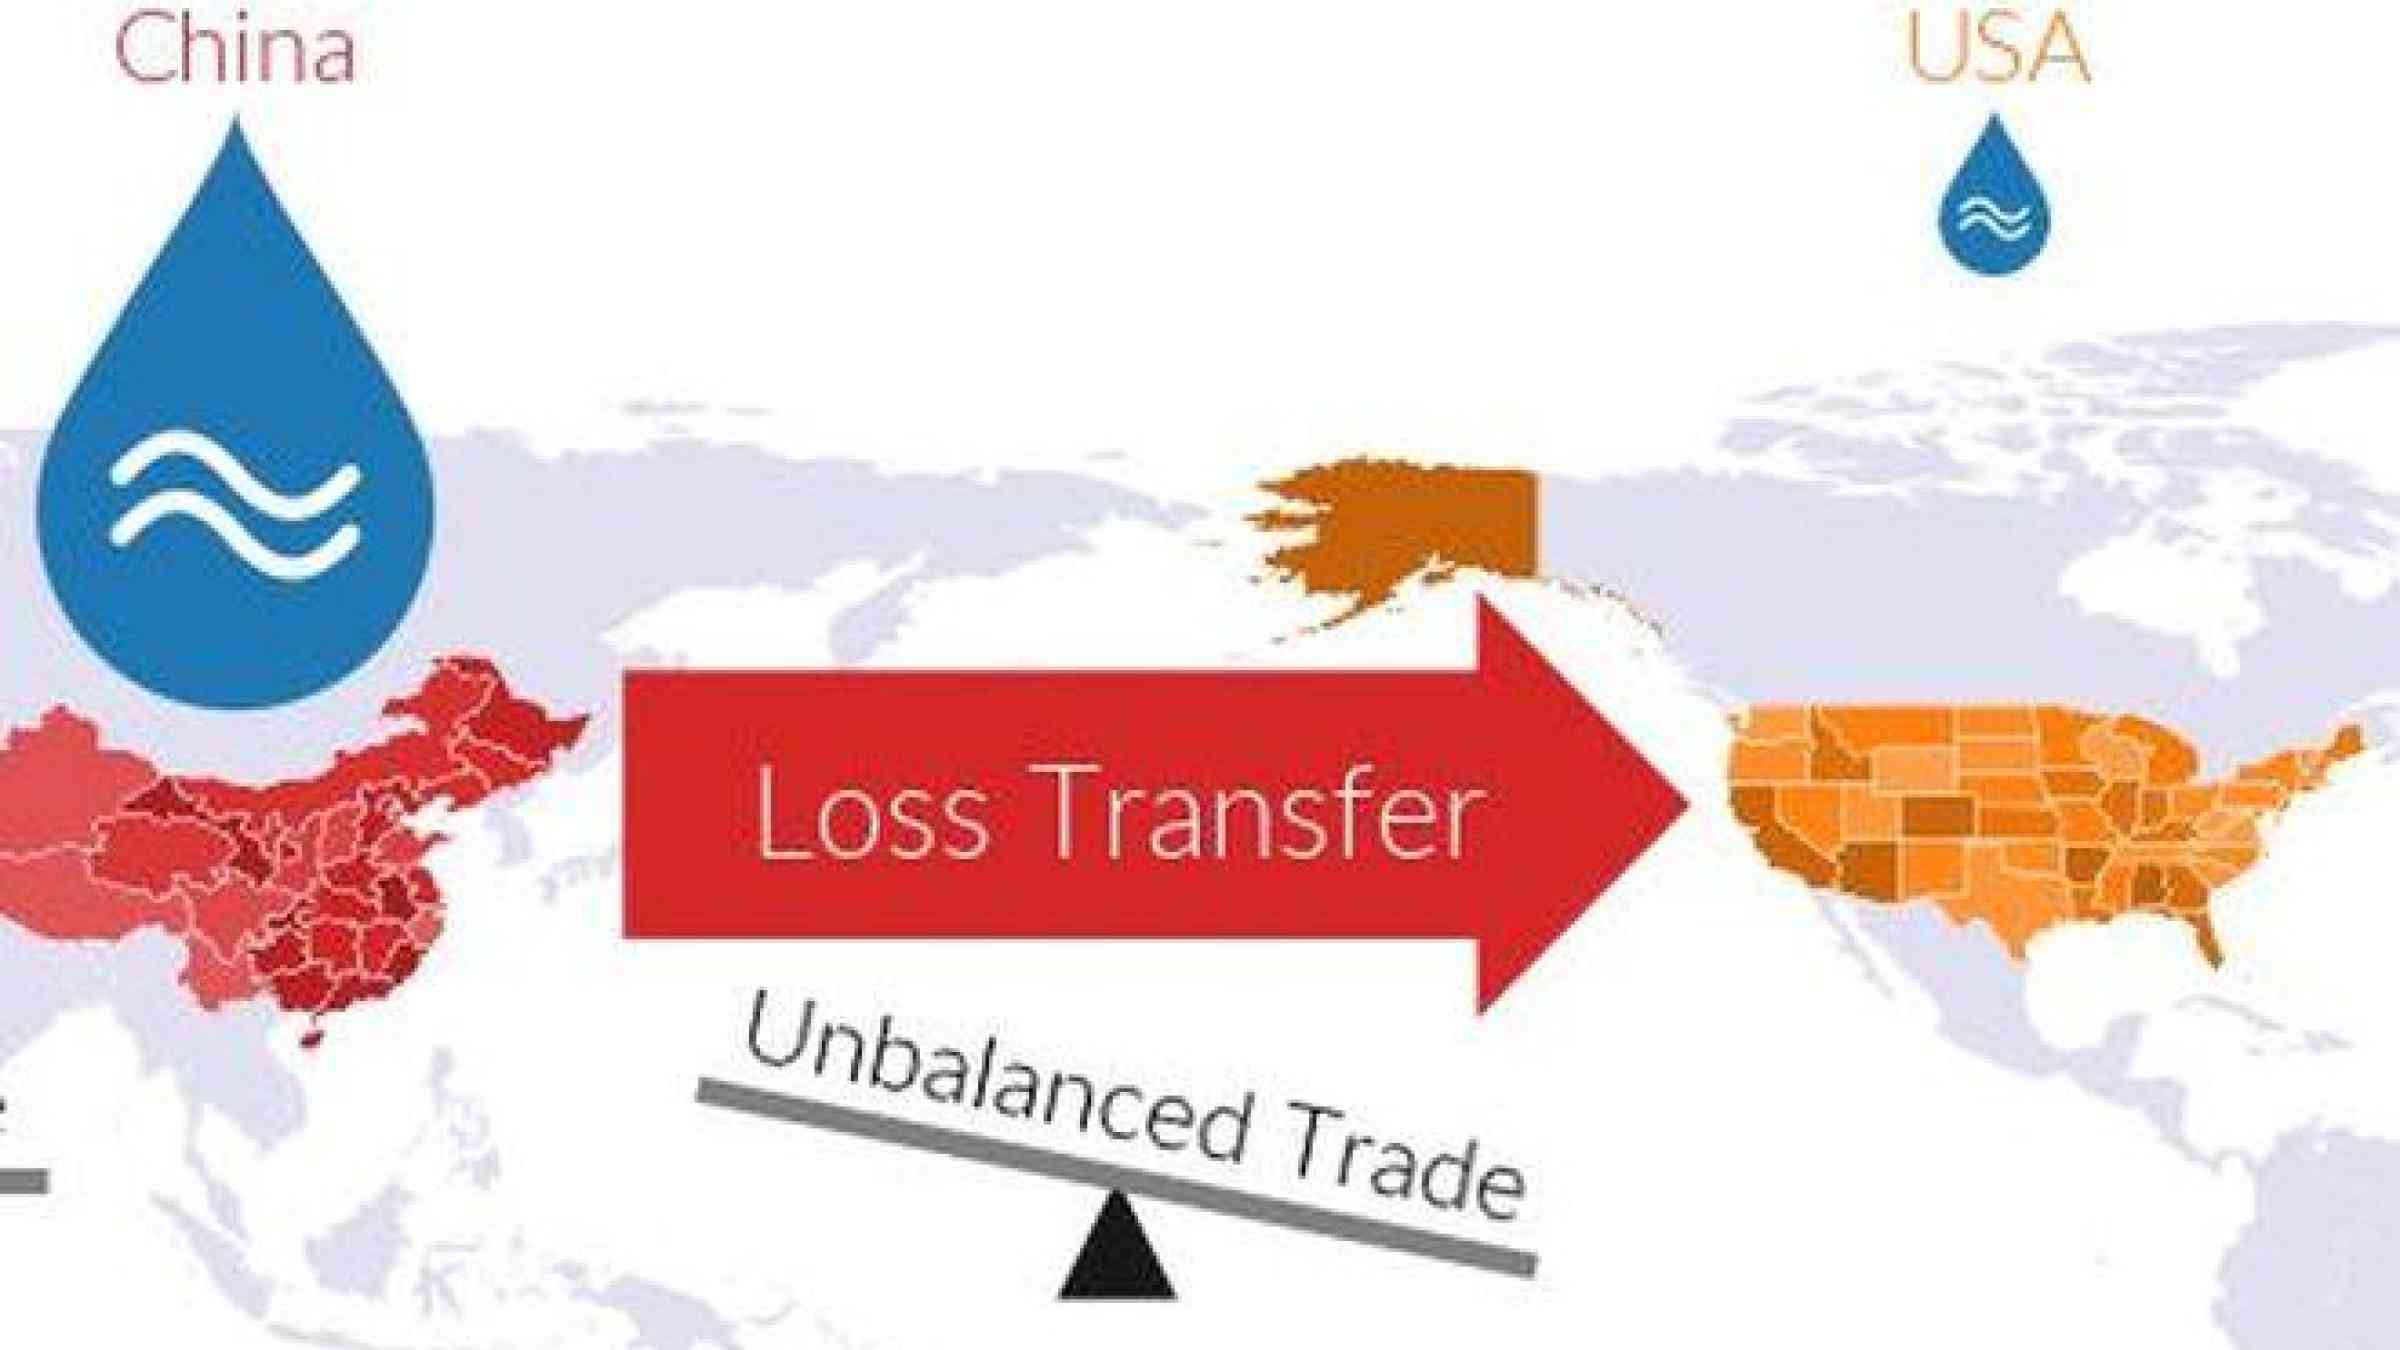 Transfer of economic losses due to river floods through trade networks from China to the US. Image: PIK